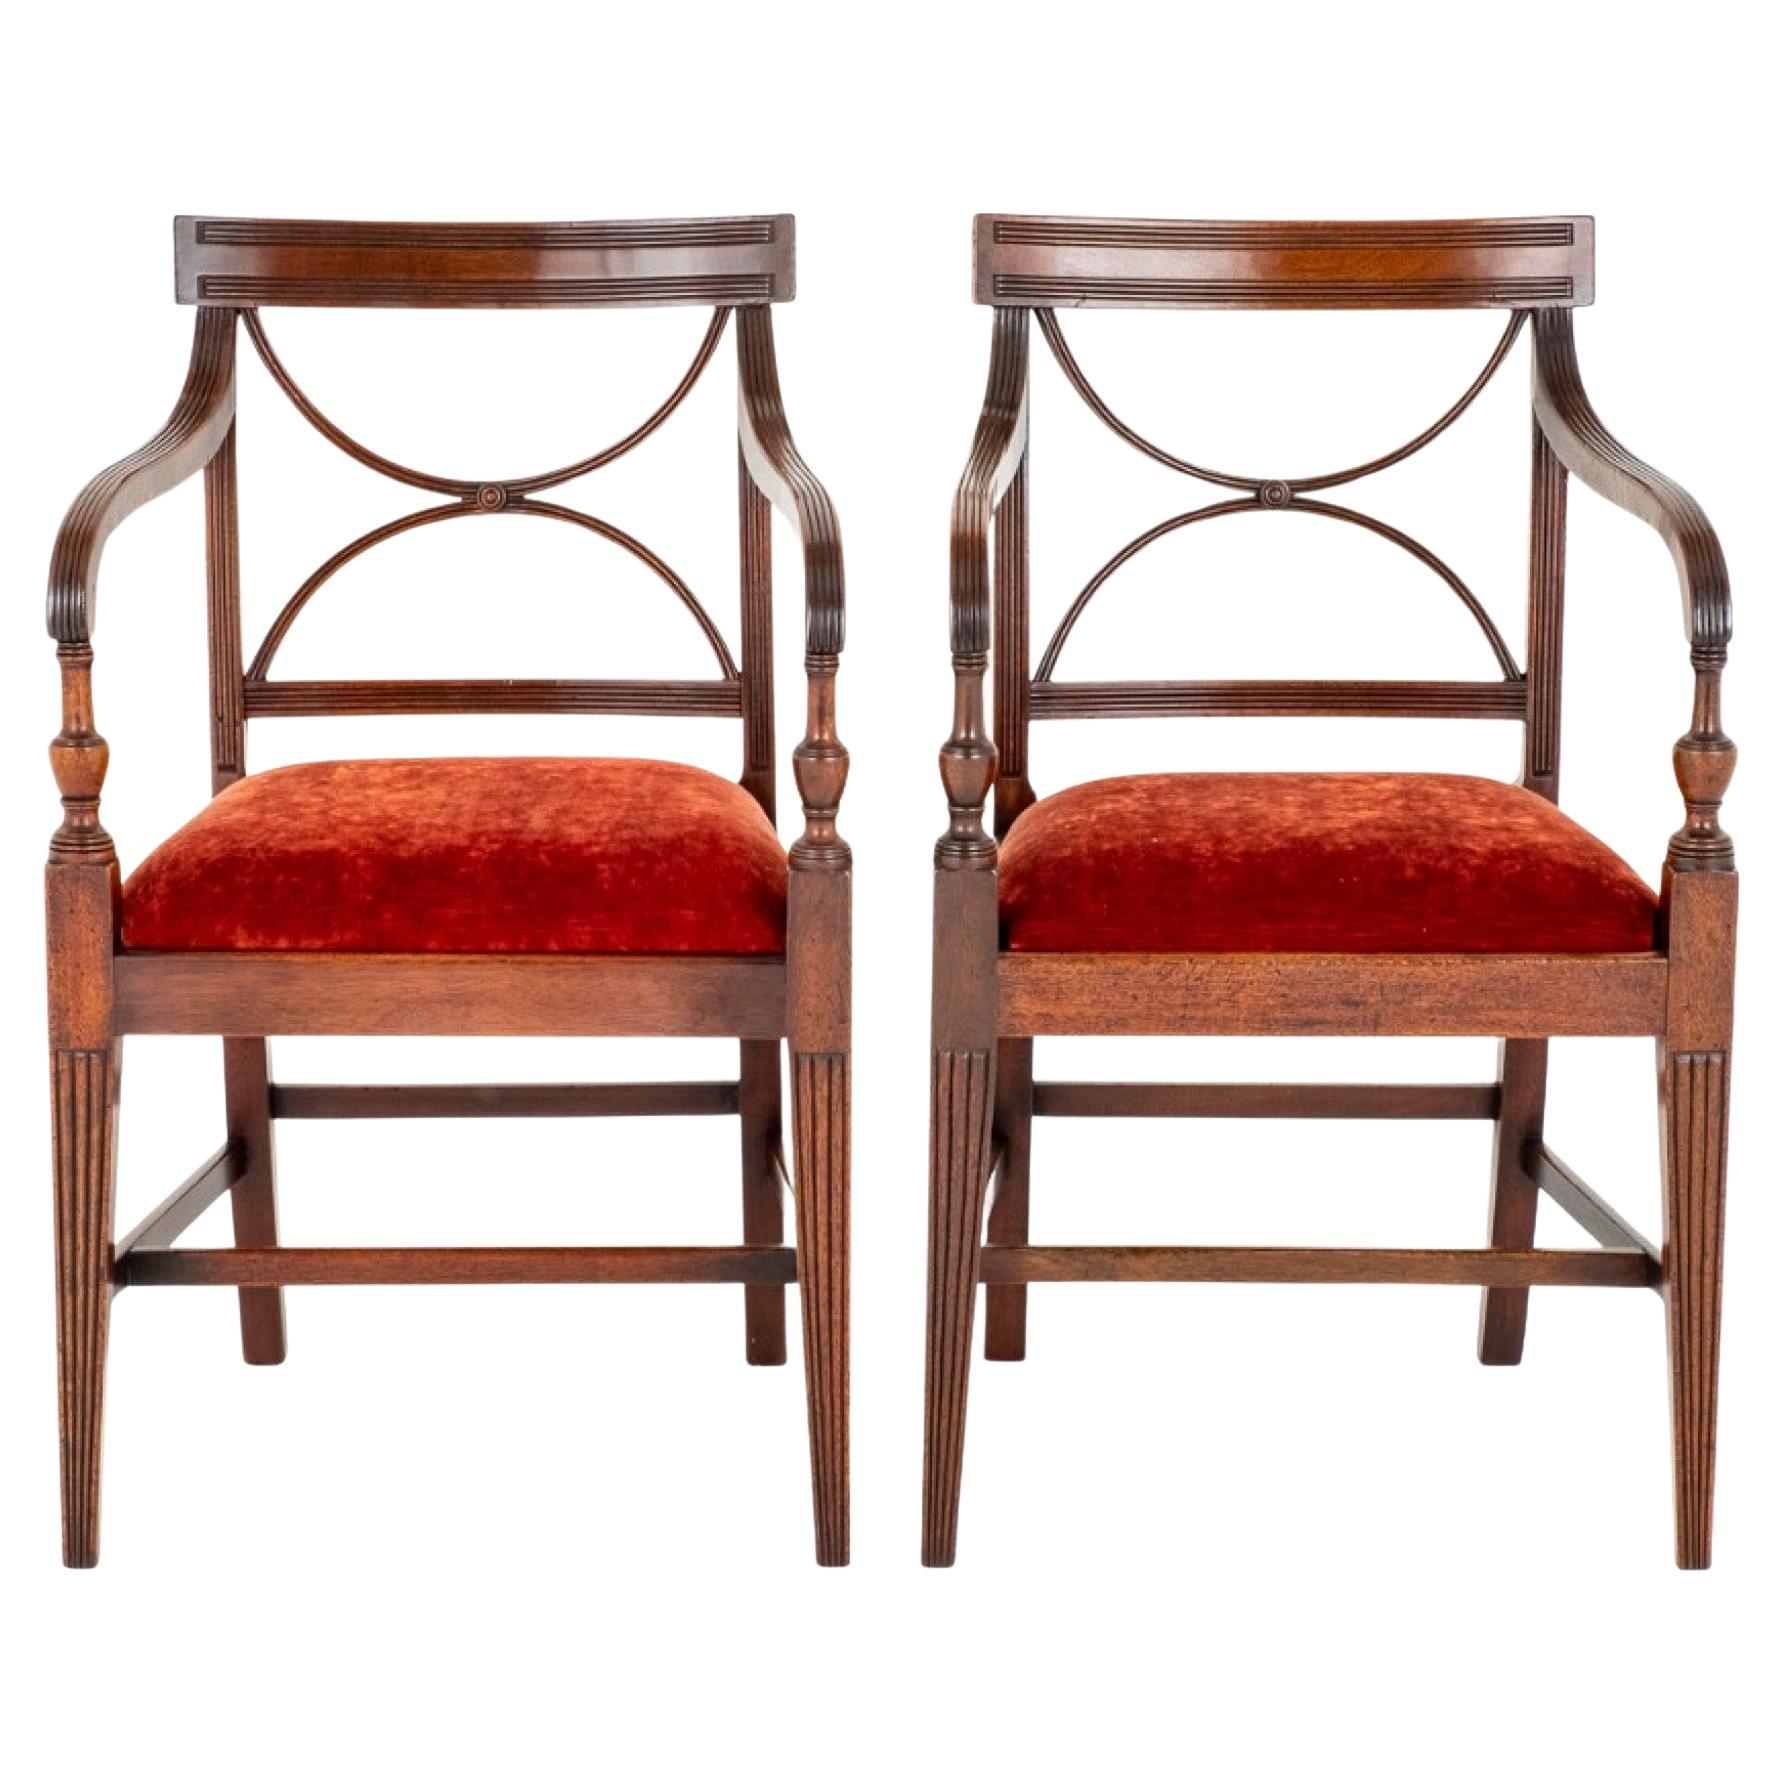 Pair Regency Arm Chairs Period Mahogany Antique For Sale